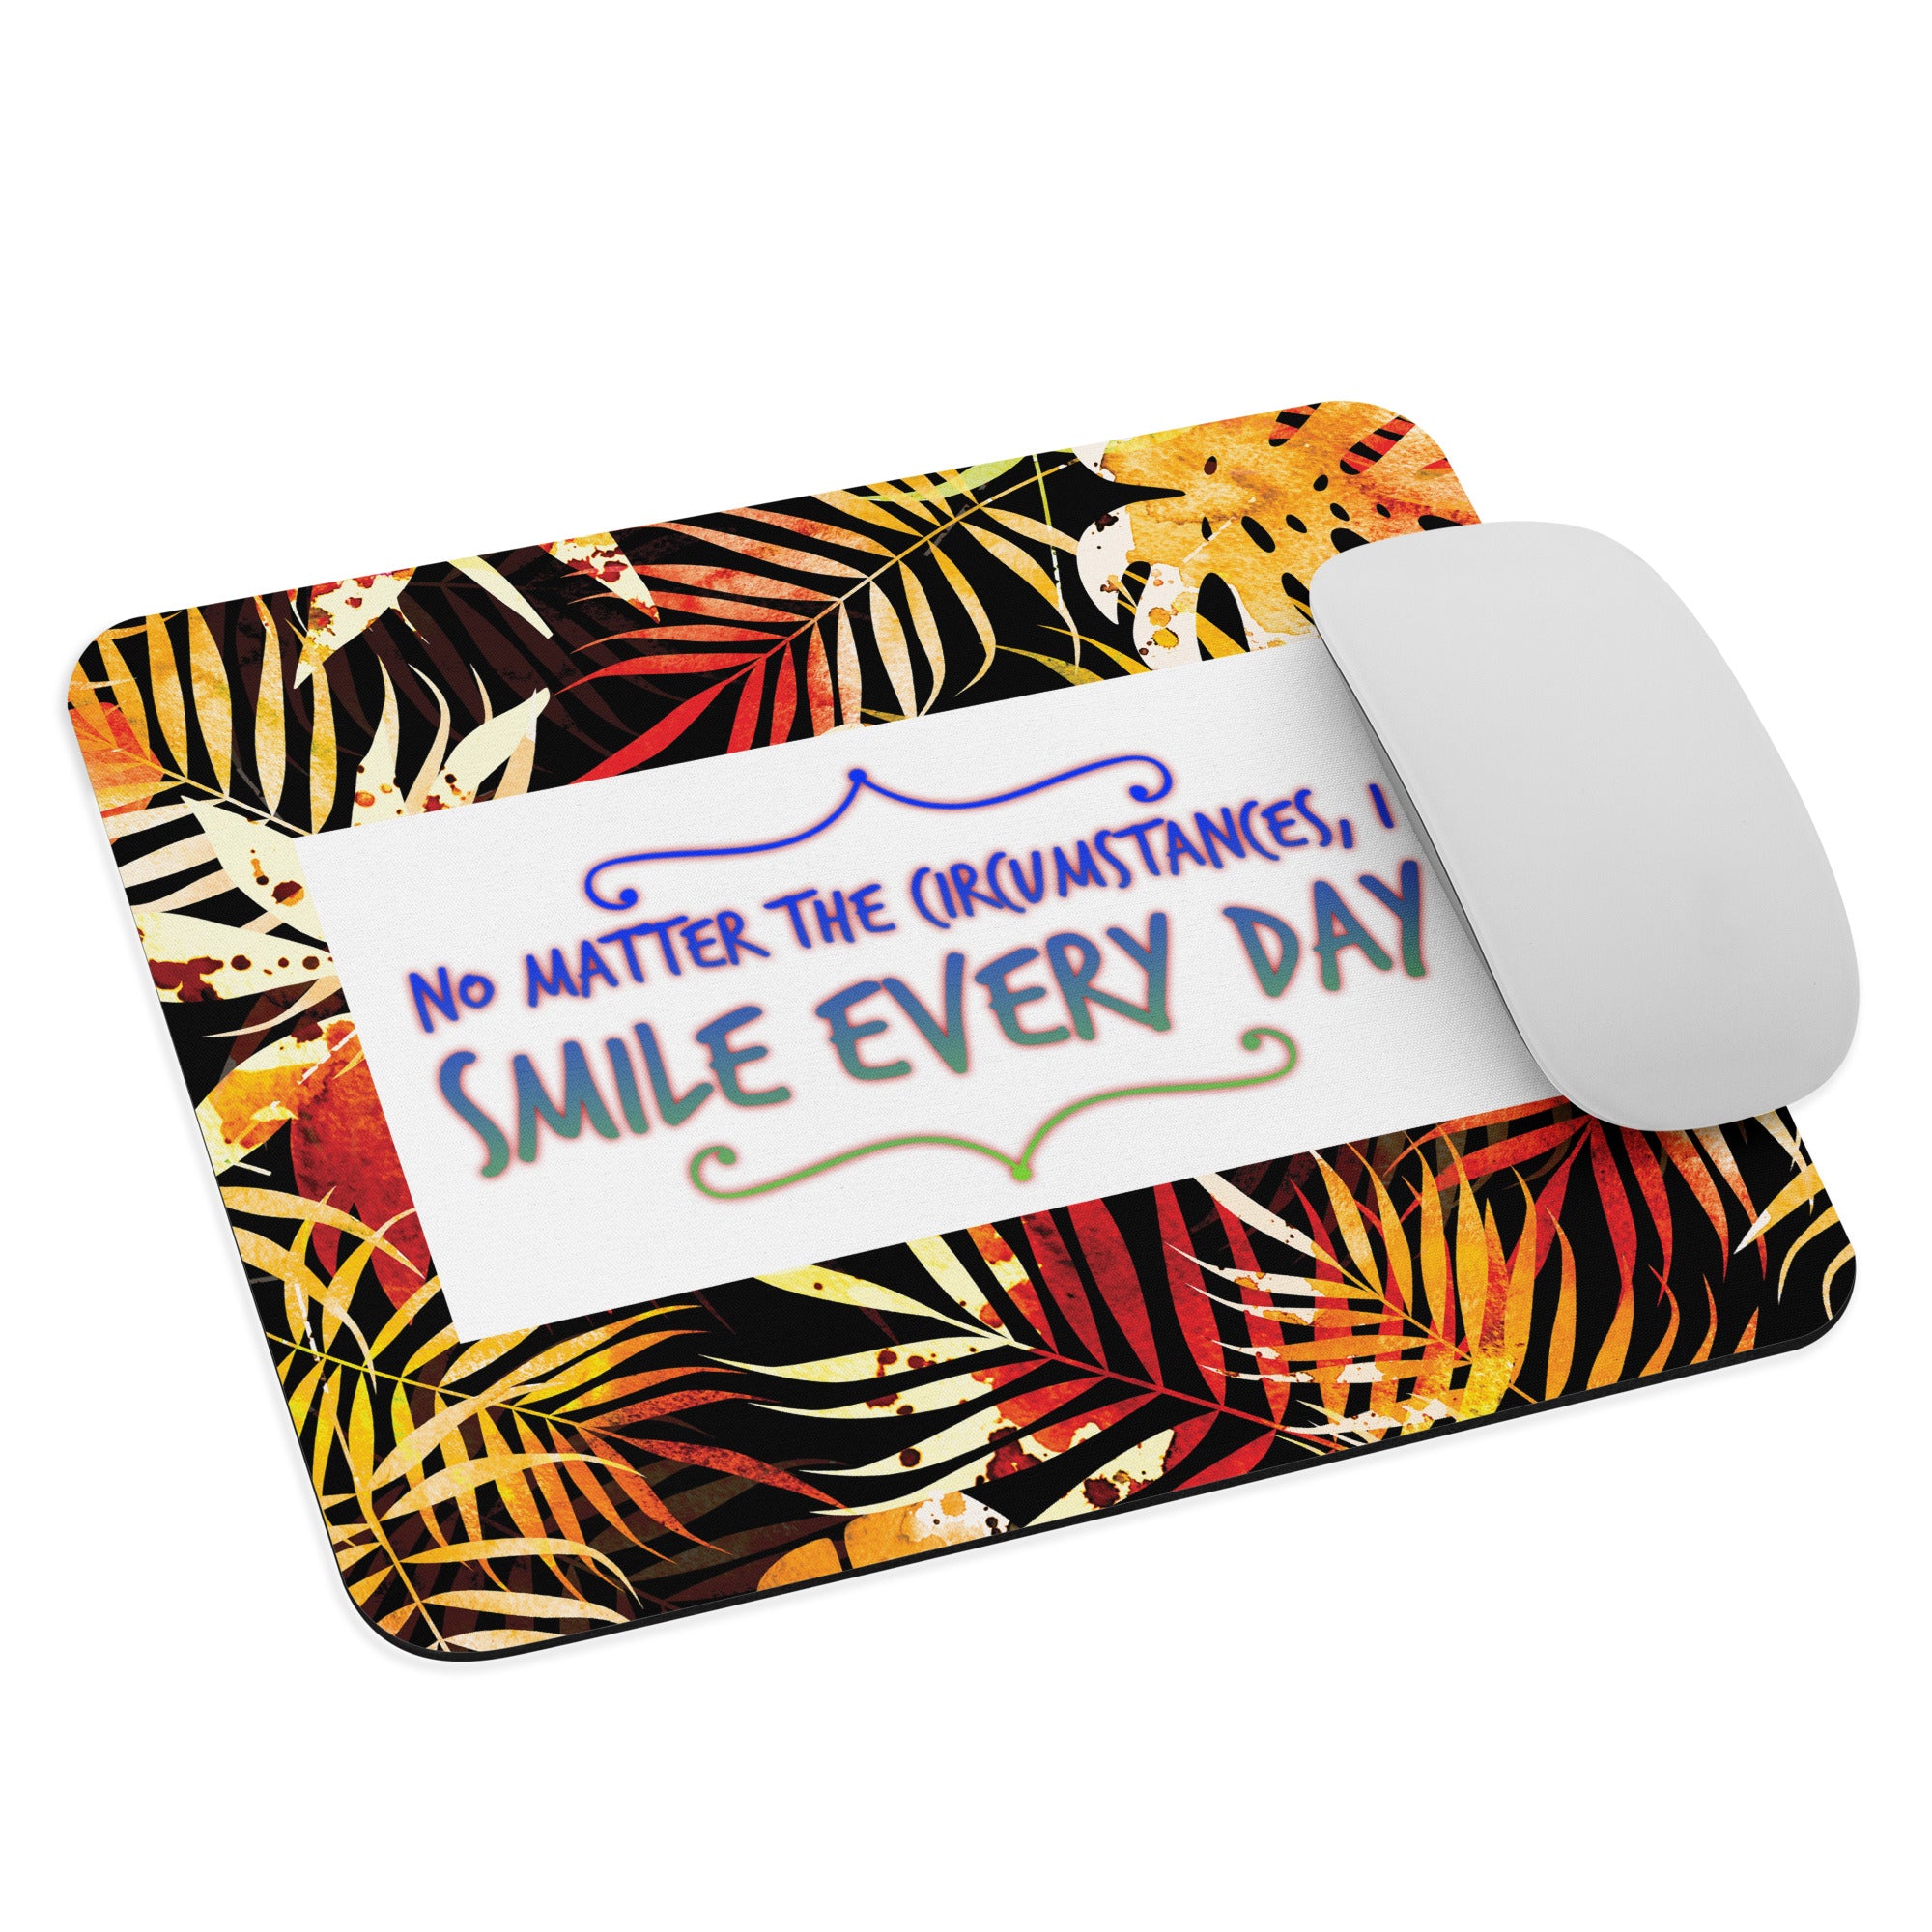 GloWell Designs - Mouse Pad - Affirmation Quote - I Smile Every Day - GloWell Designs